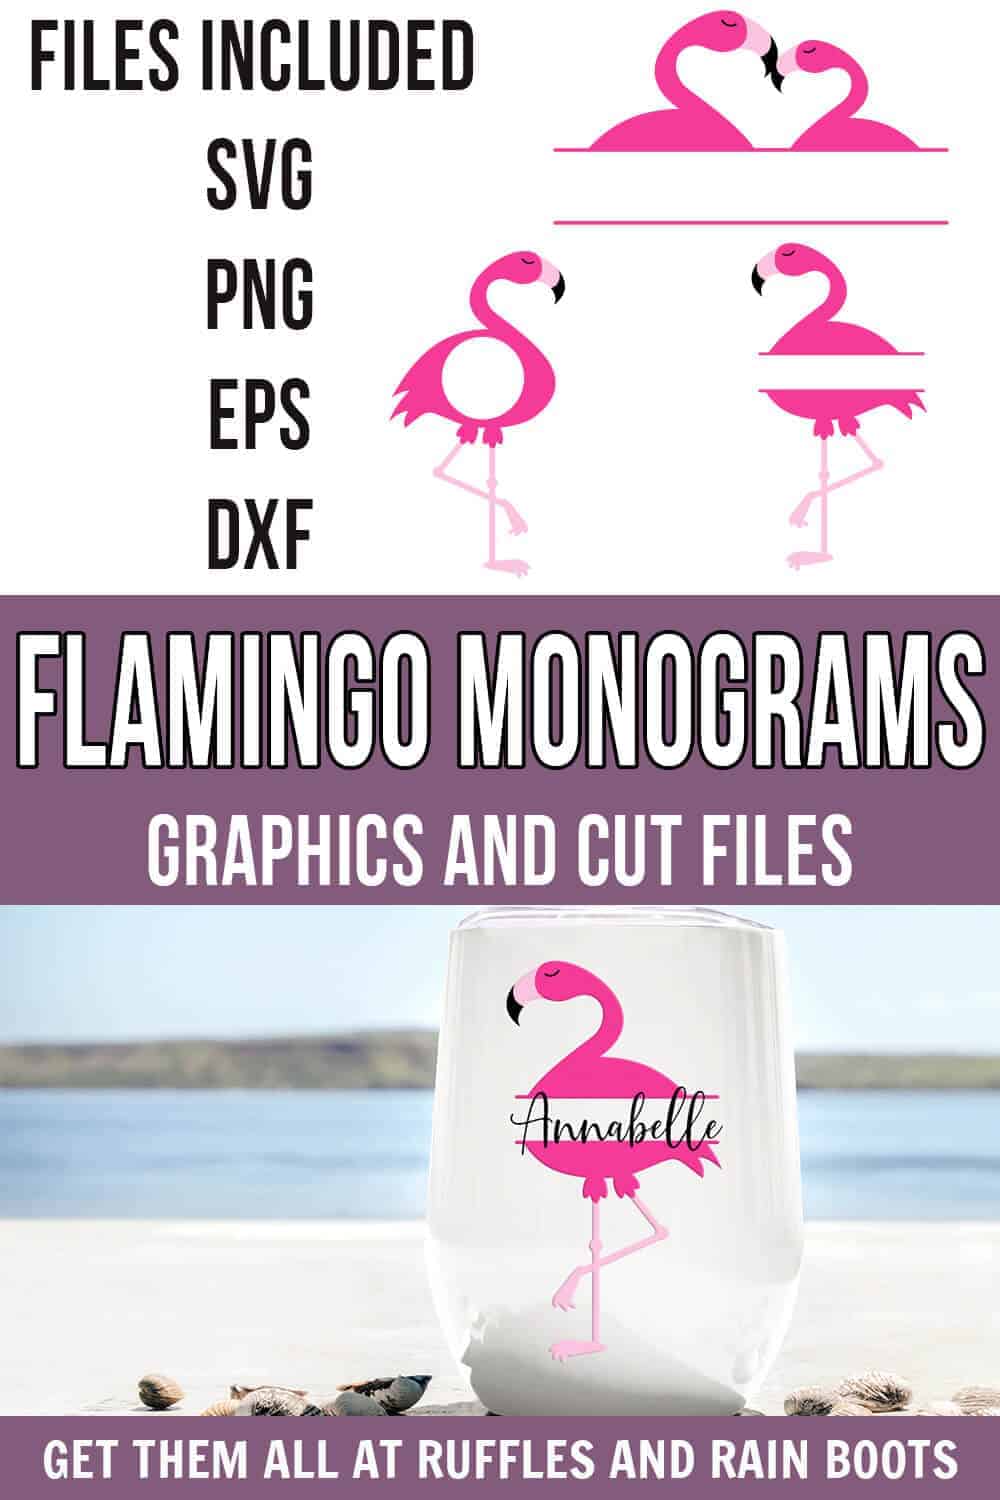 full set of flamingo monogram svg not flattened with text which reads flamingo monograms graphics and cut files